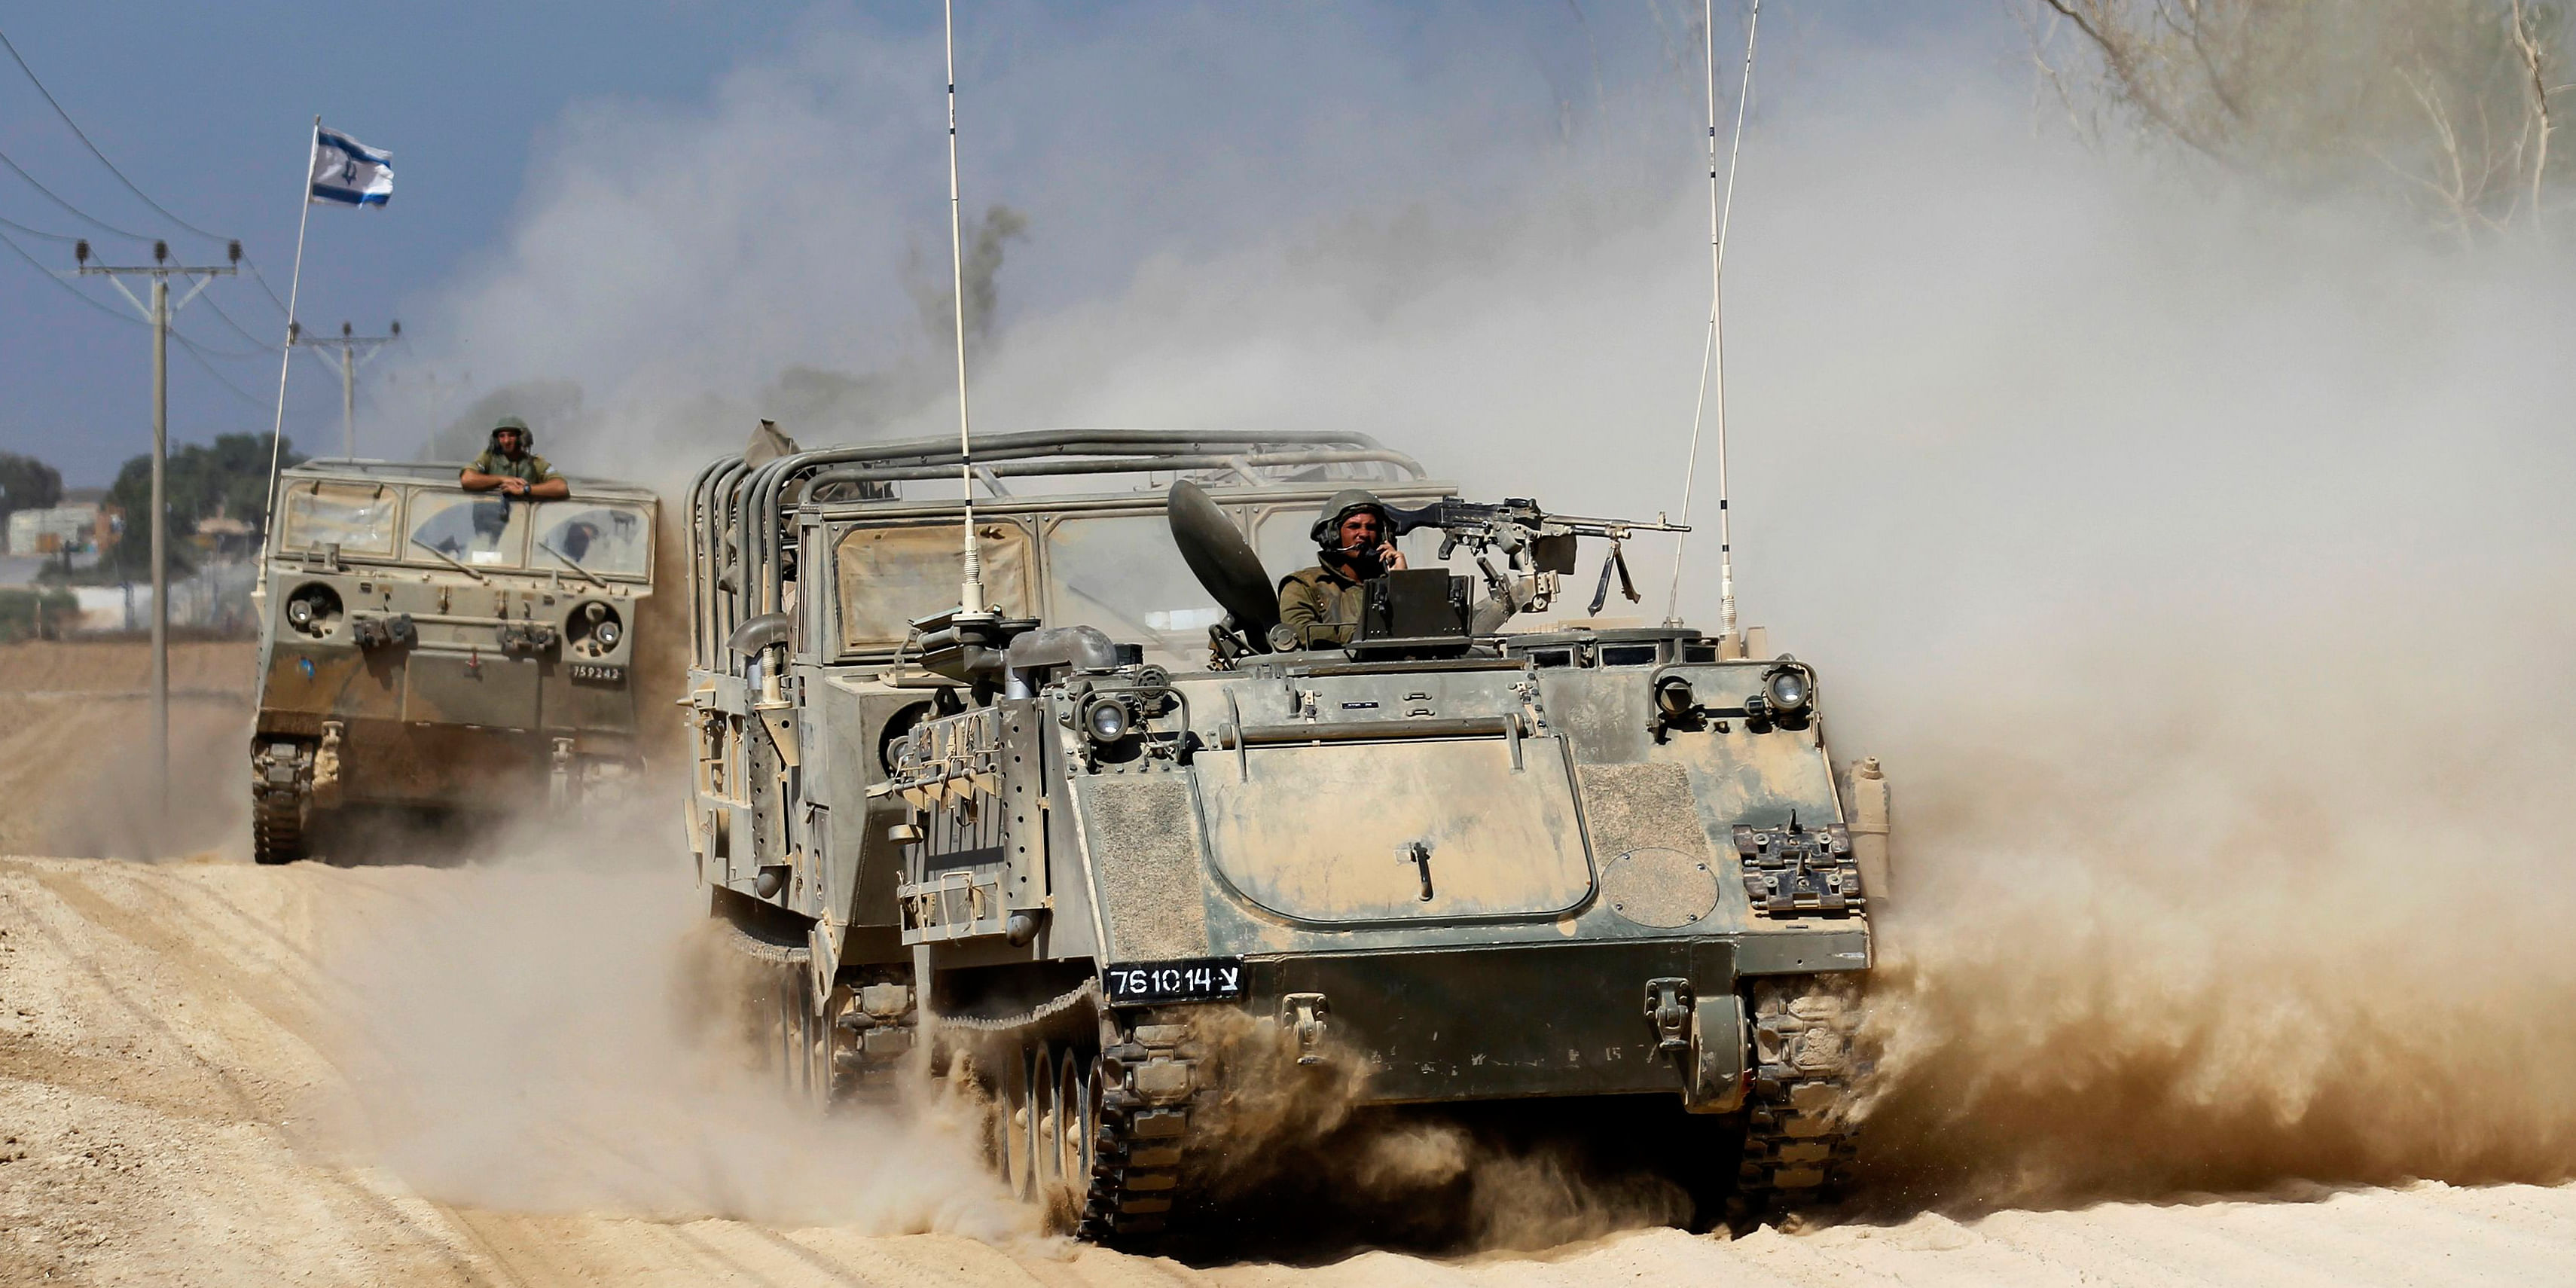 An Israeli armoured personnel carrier (APC) manoeuvres near the border with Gaza Strip August 22. A mortar bomb fired from Gaza killed a four-year-old Israeli boy, in a border collective farm on Friday, Israeli security sources said, the first Israeli child killed in the conflict. Photo: Reuters